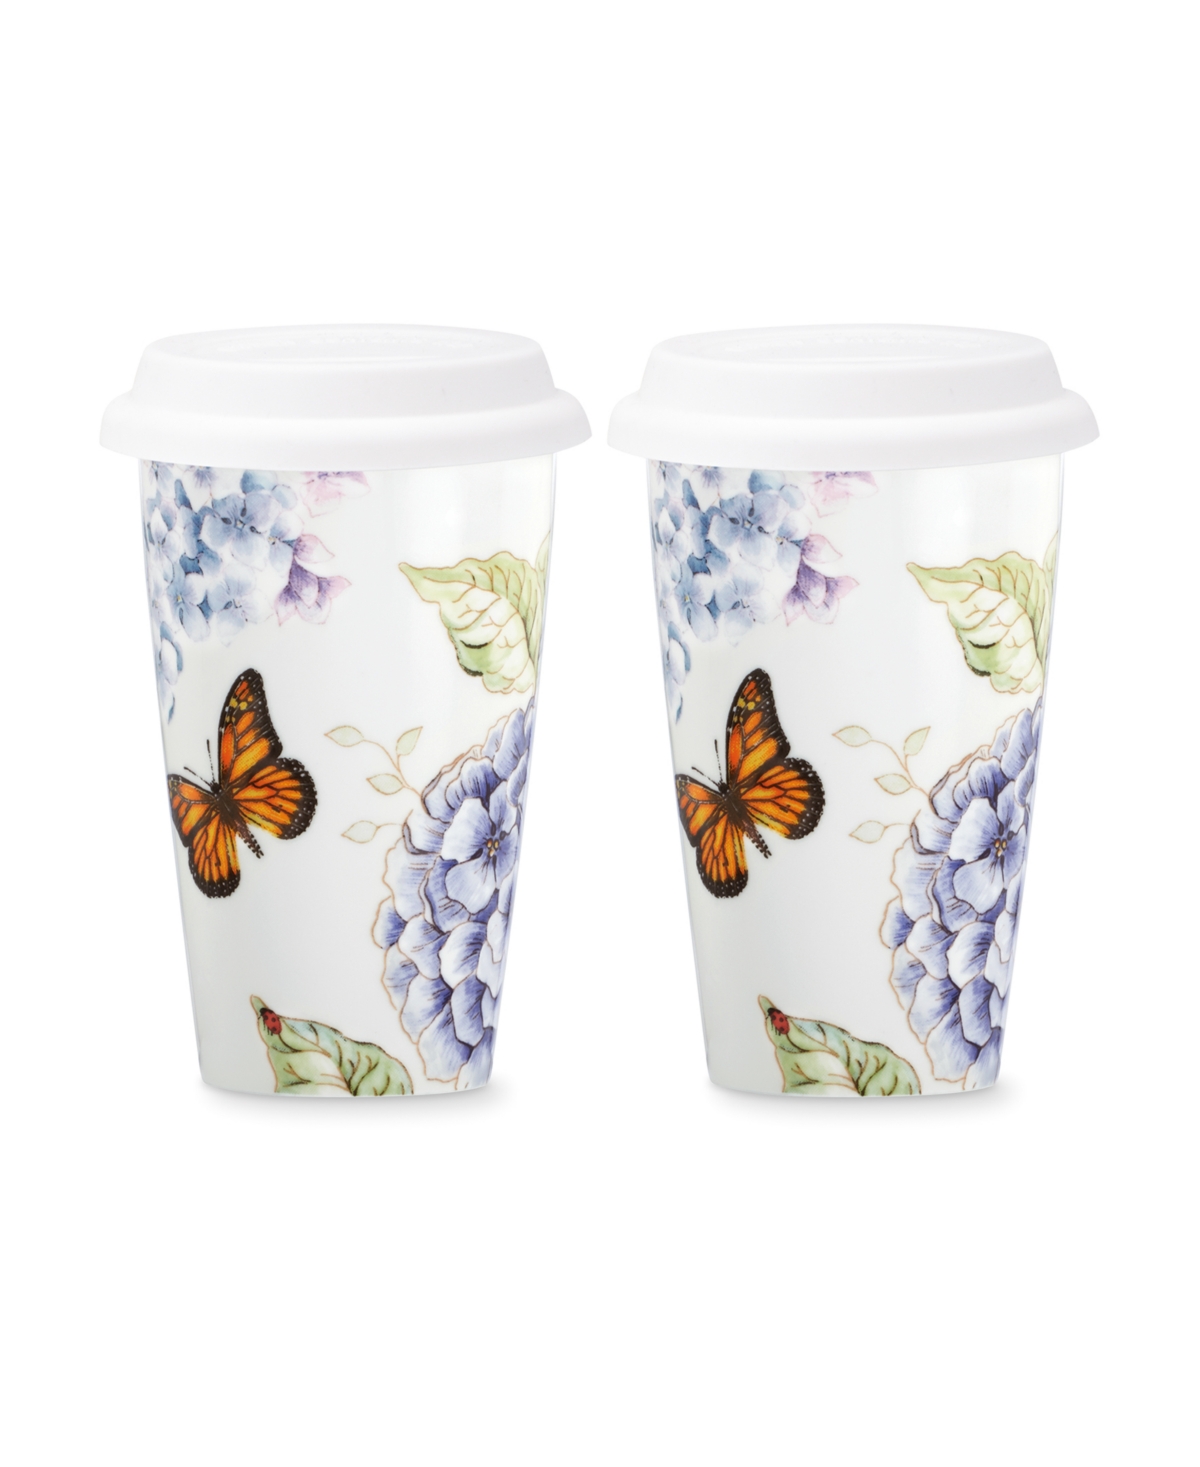 Lenox Butterfly Meadow Thermal Travel Mugs, Set Of 2 In Blue And White